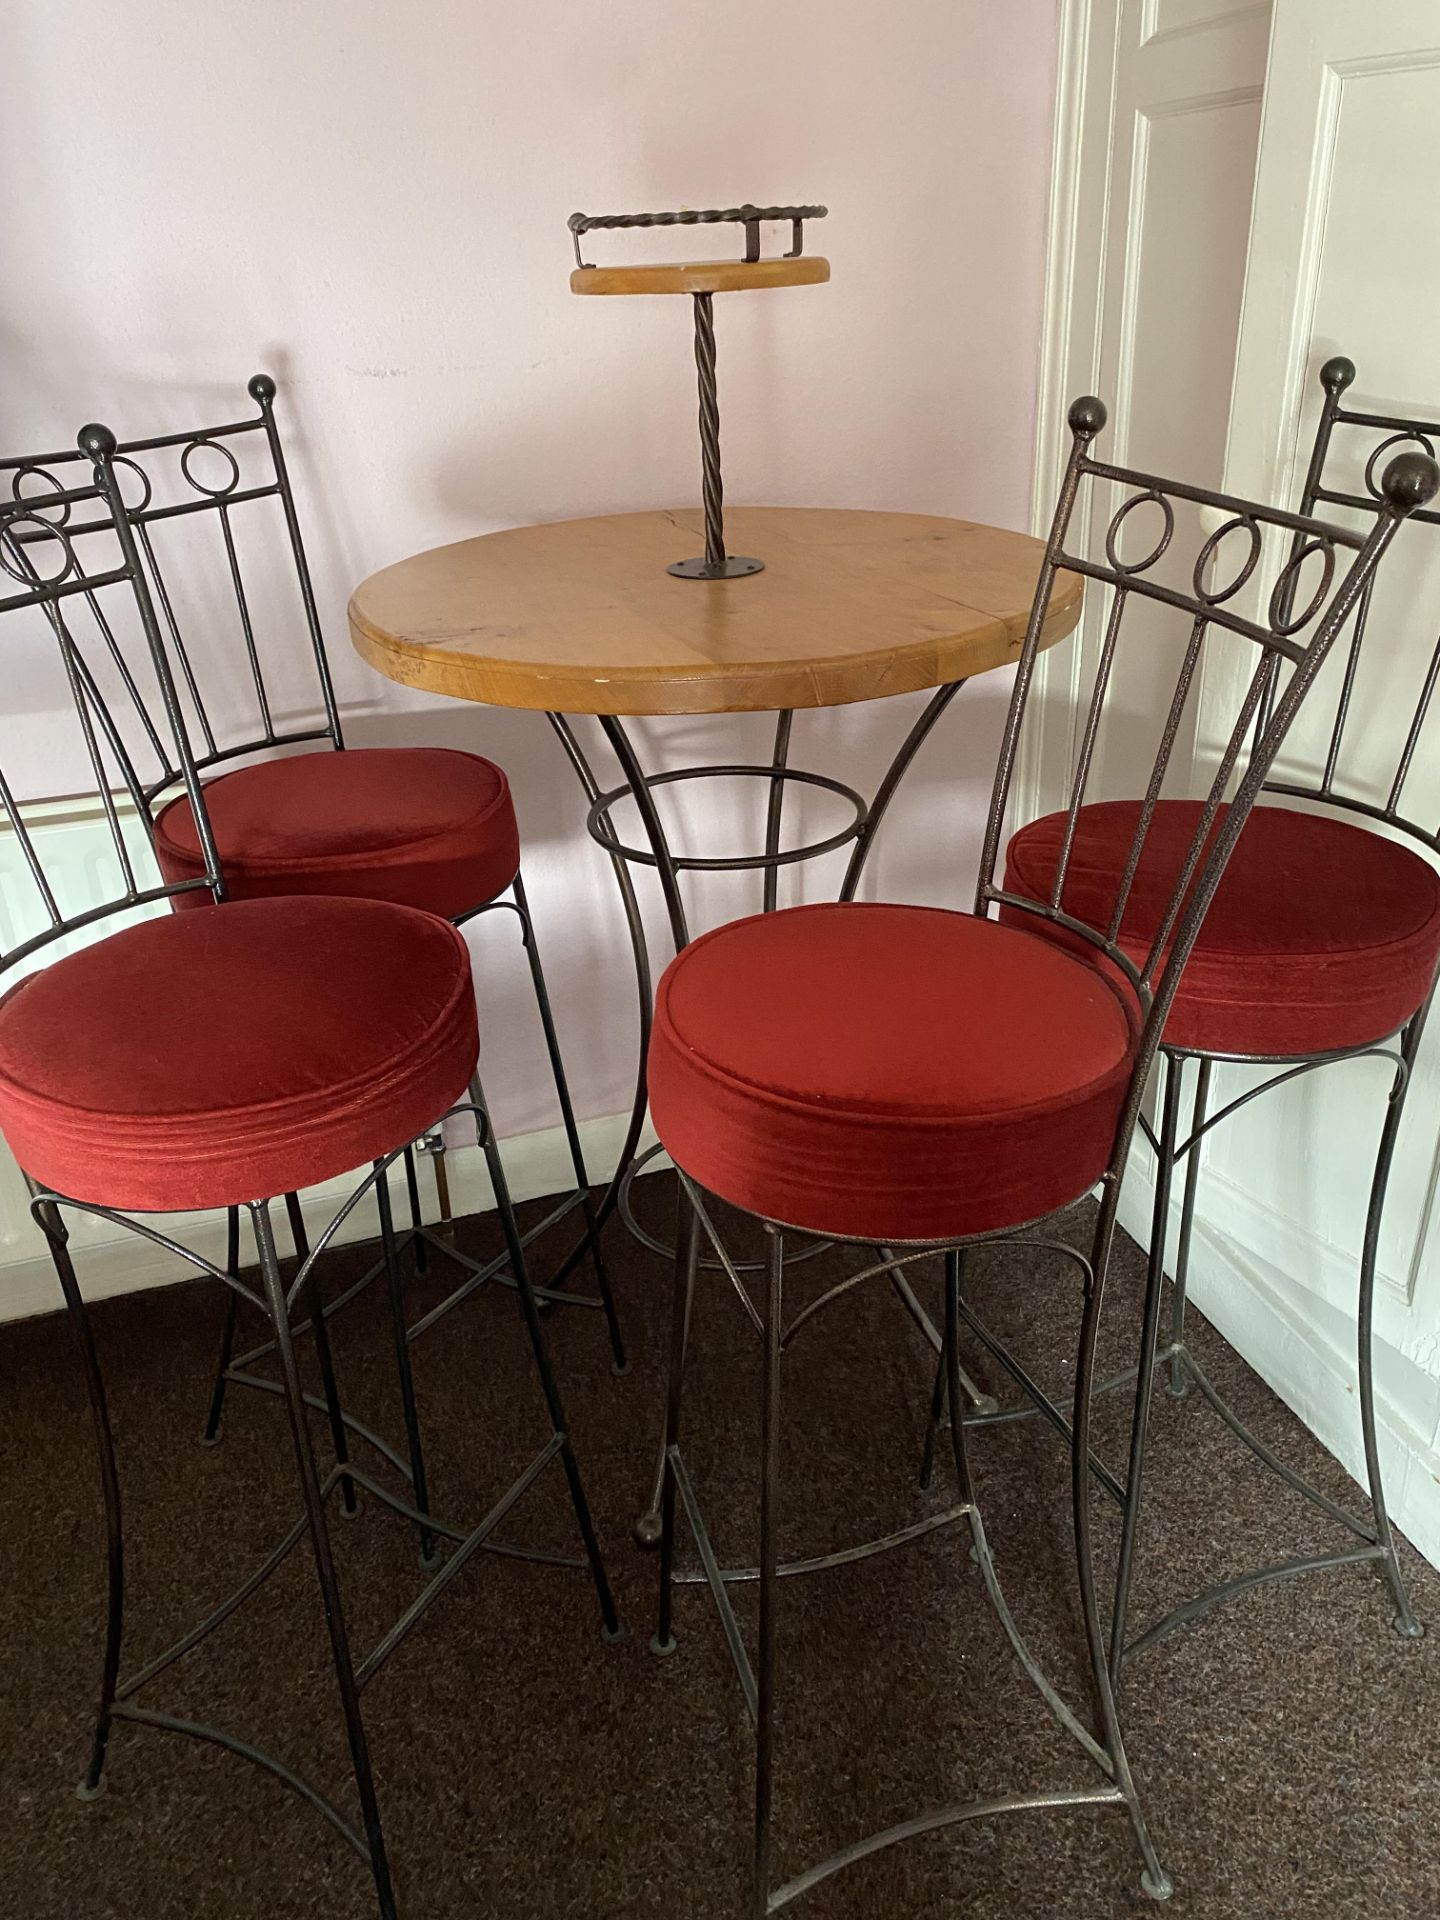 Wrought Iron Framed 2 Tier Bar Table (75cm Diameter, table height 107cm) with 4 chairs.